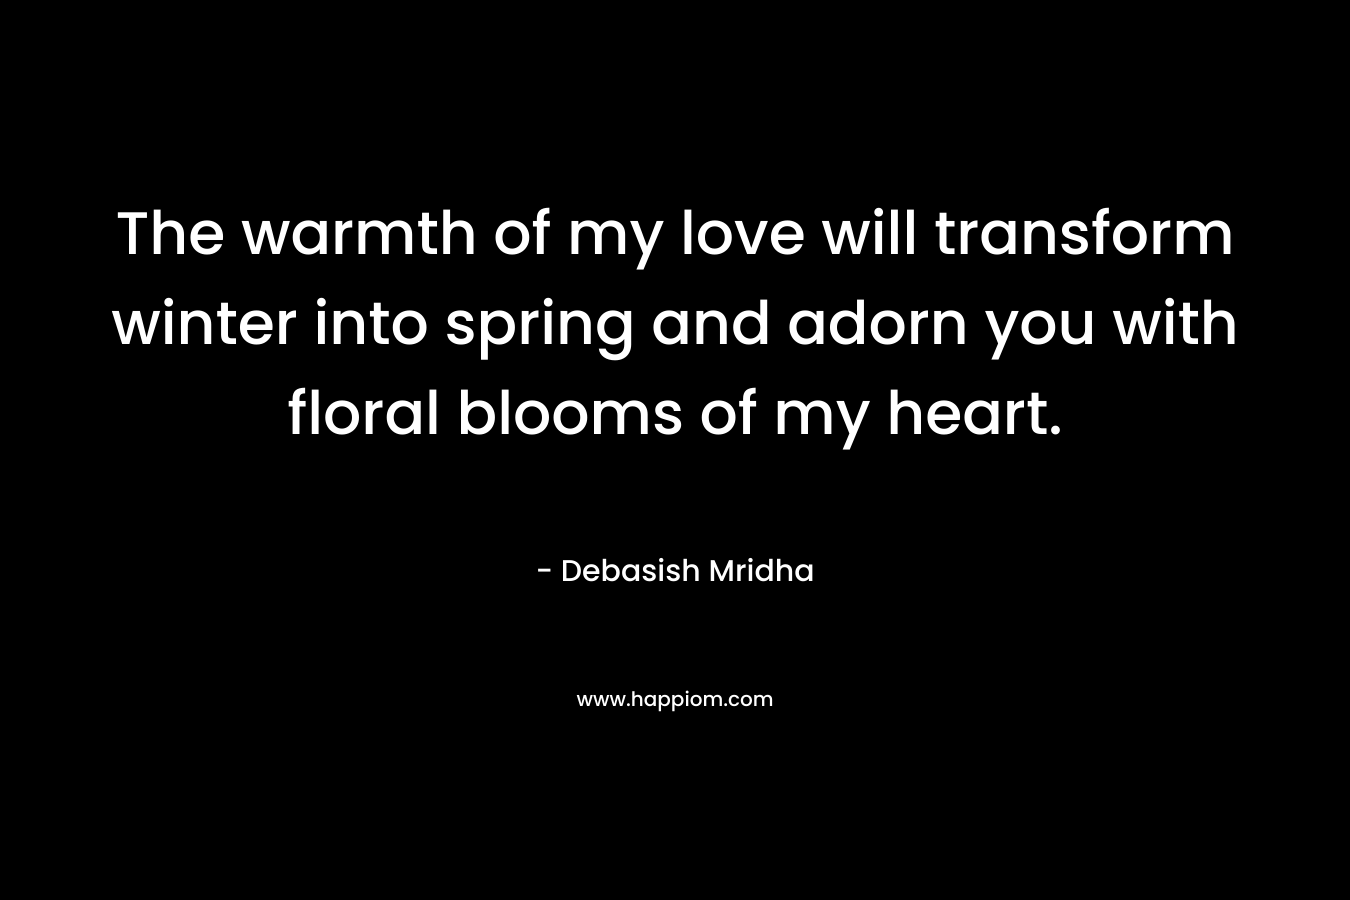 The warmth of my love will transform winter into spring and adorn you with floral blooms of my heart. – Debasish Mridha